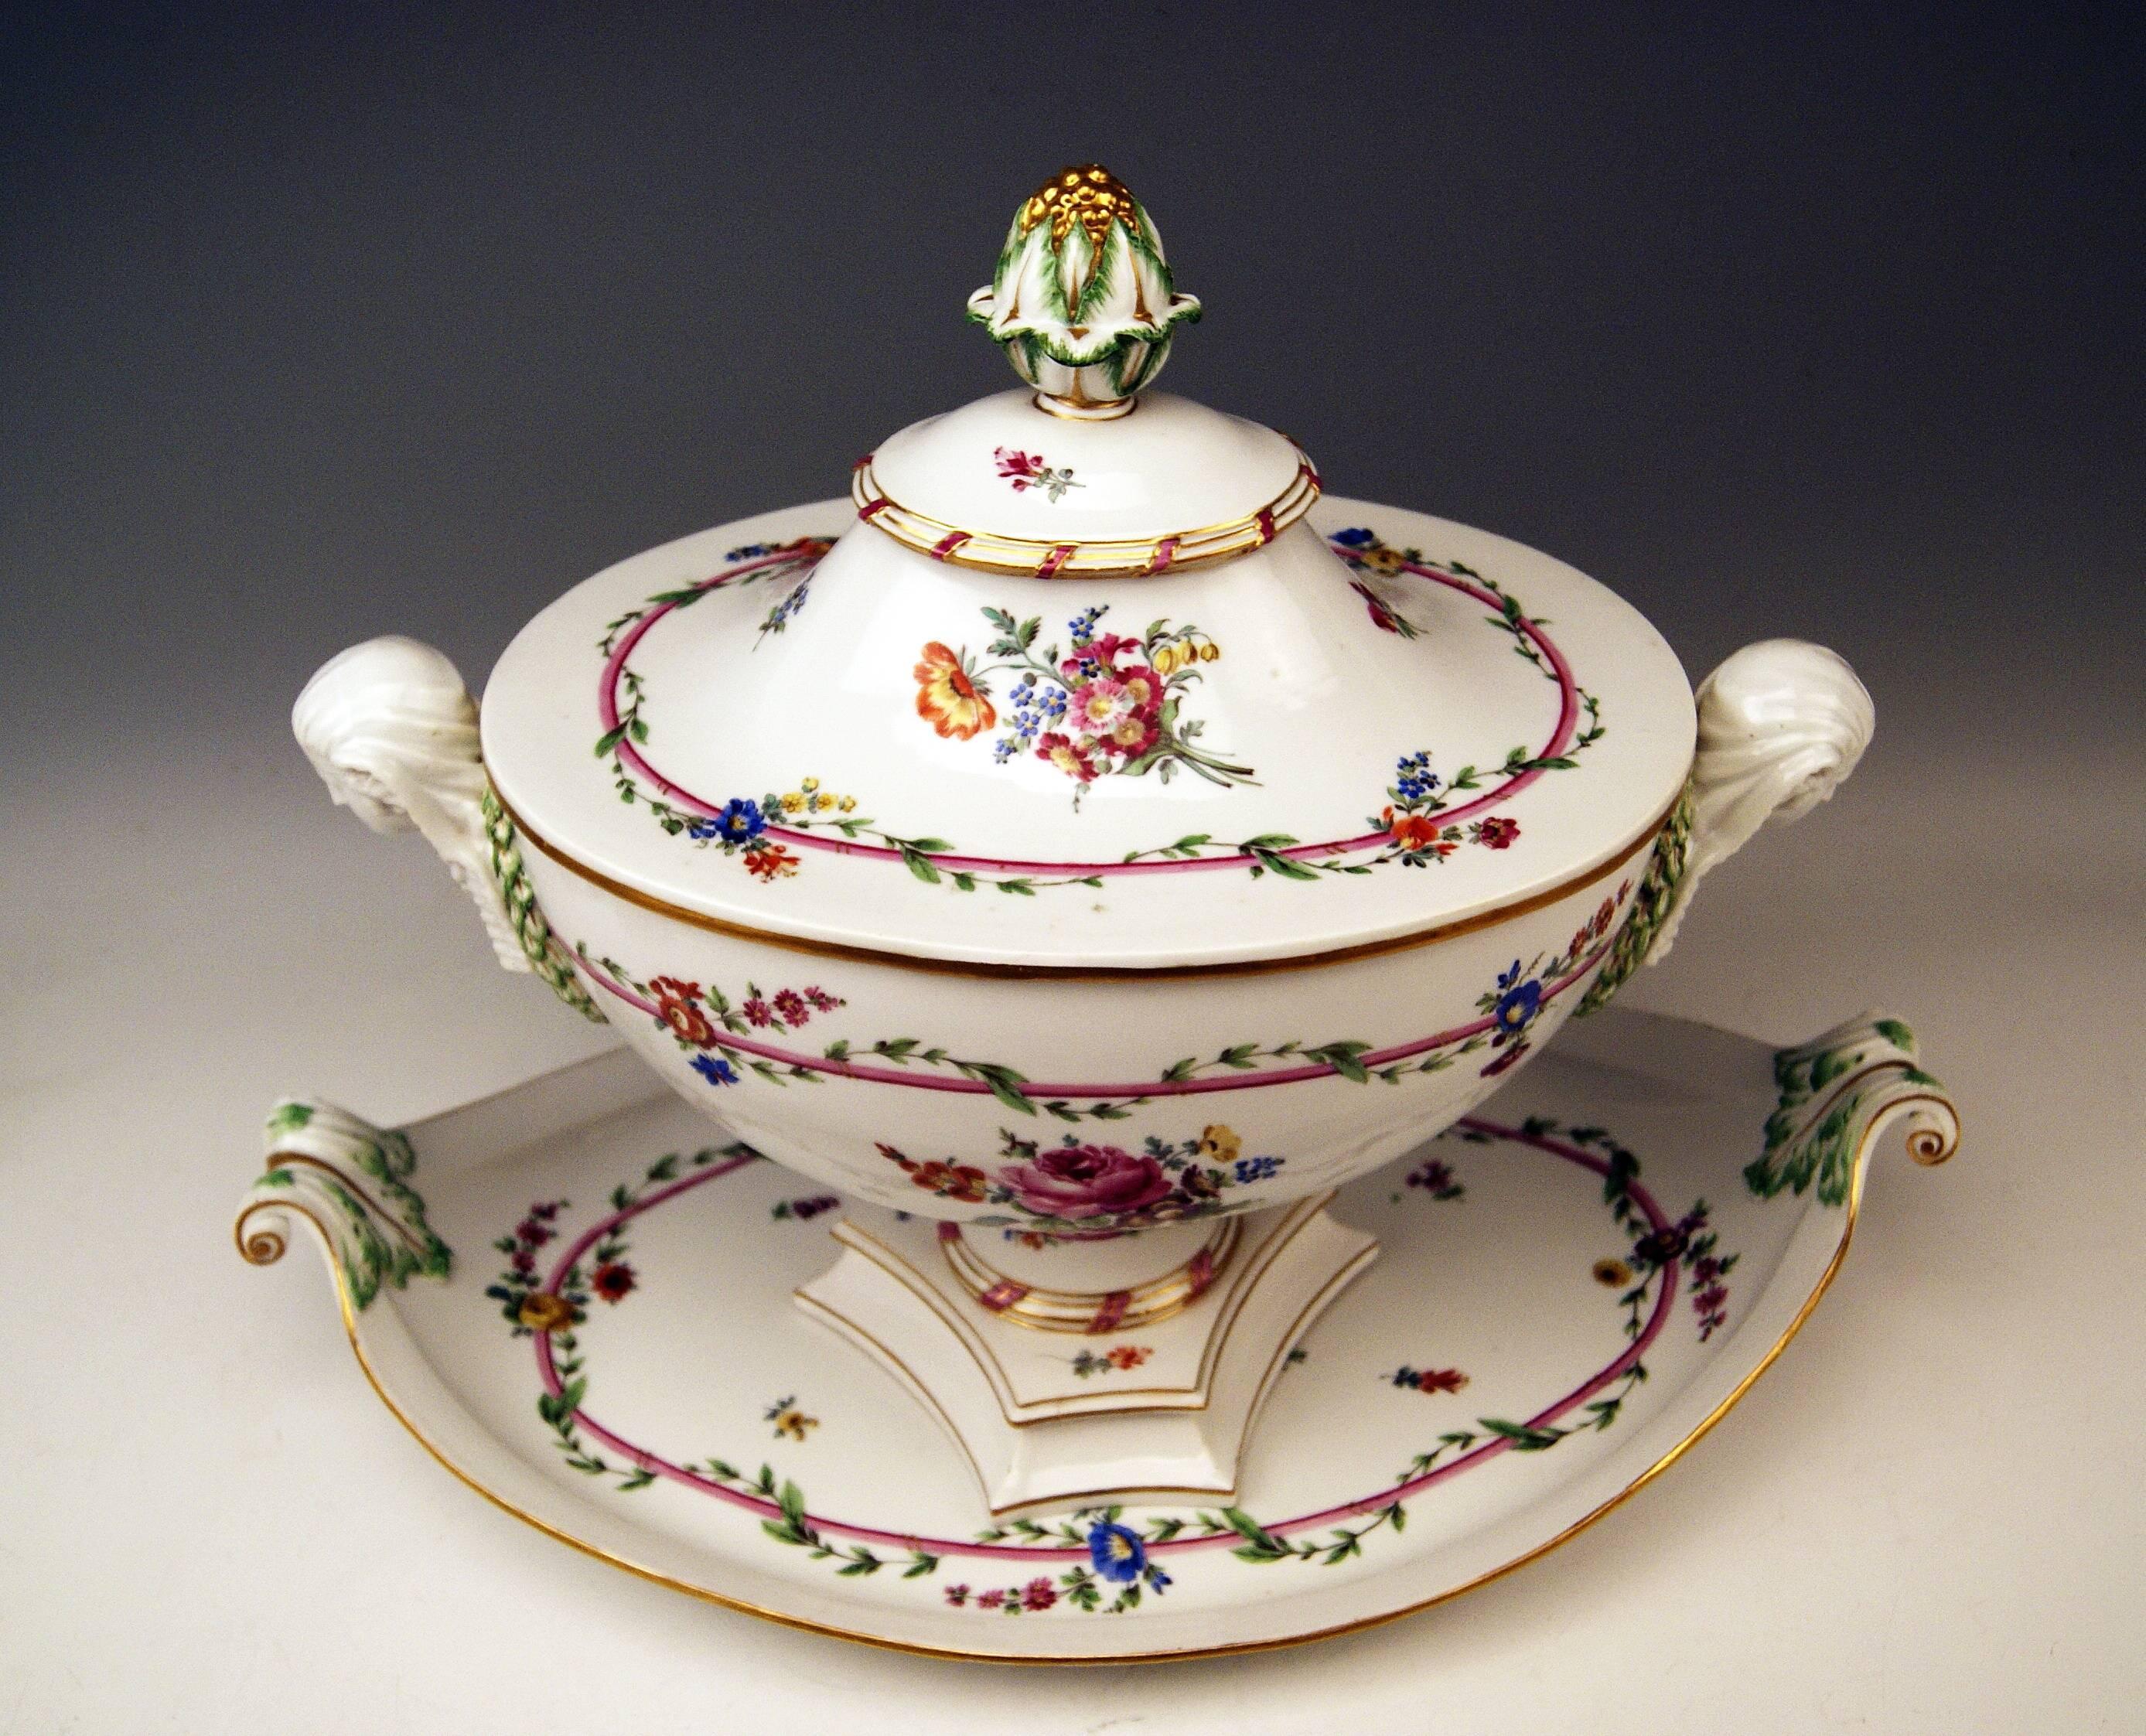 Meissen very interesting items (rarity due to age):
Large lidded tureen with platter / presentoir, of rarest manufacturing quality (painted flowers and sculptured decorations).
 
Manufactory: Meissen.
Hallmarked: Blue Meissen Sword Mark.
First